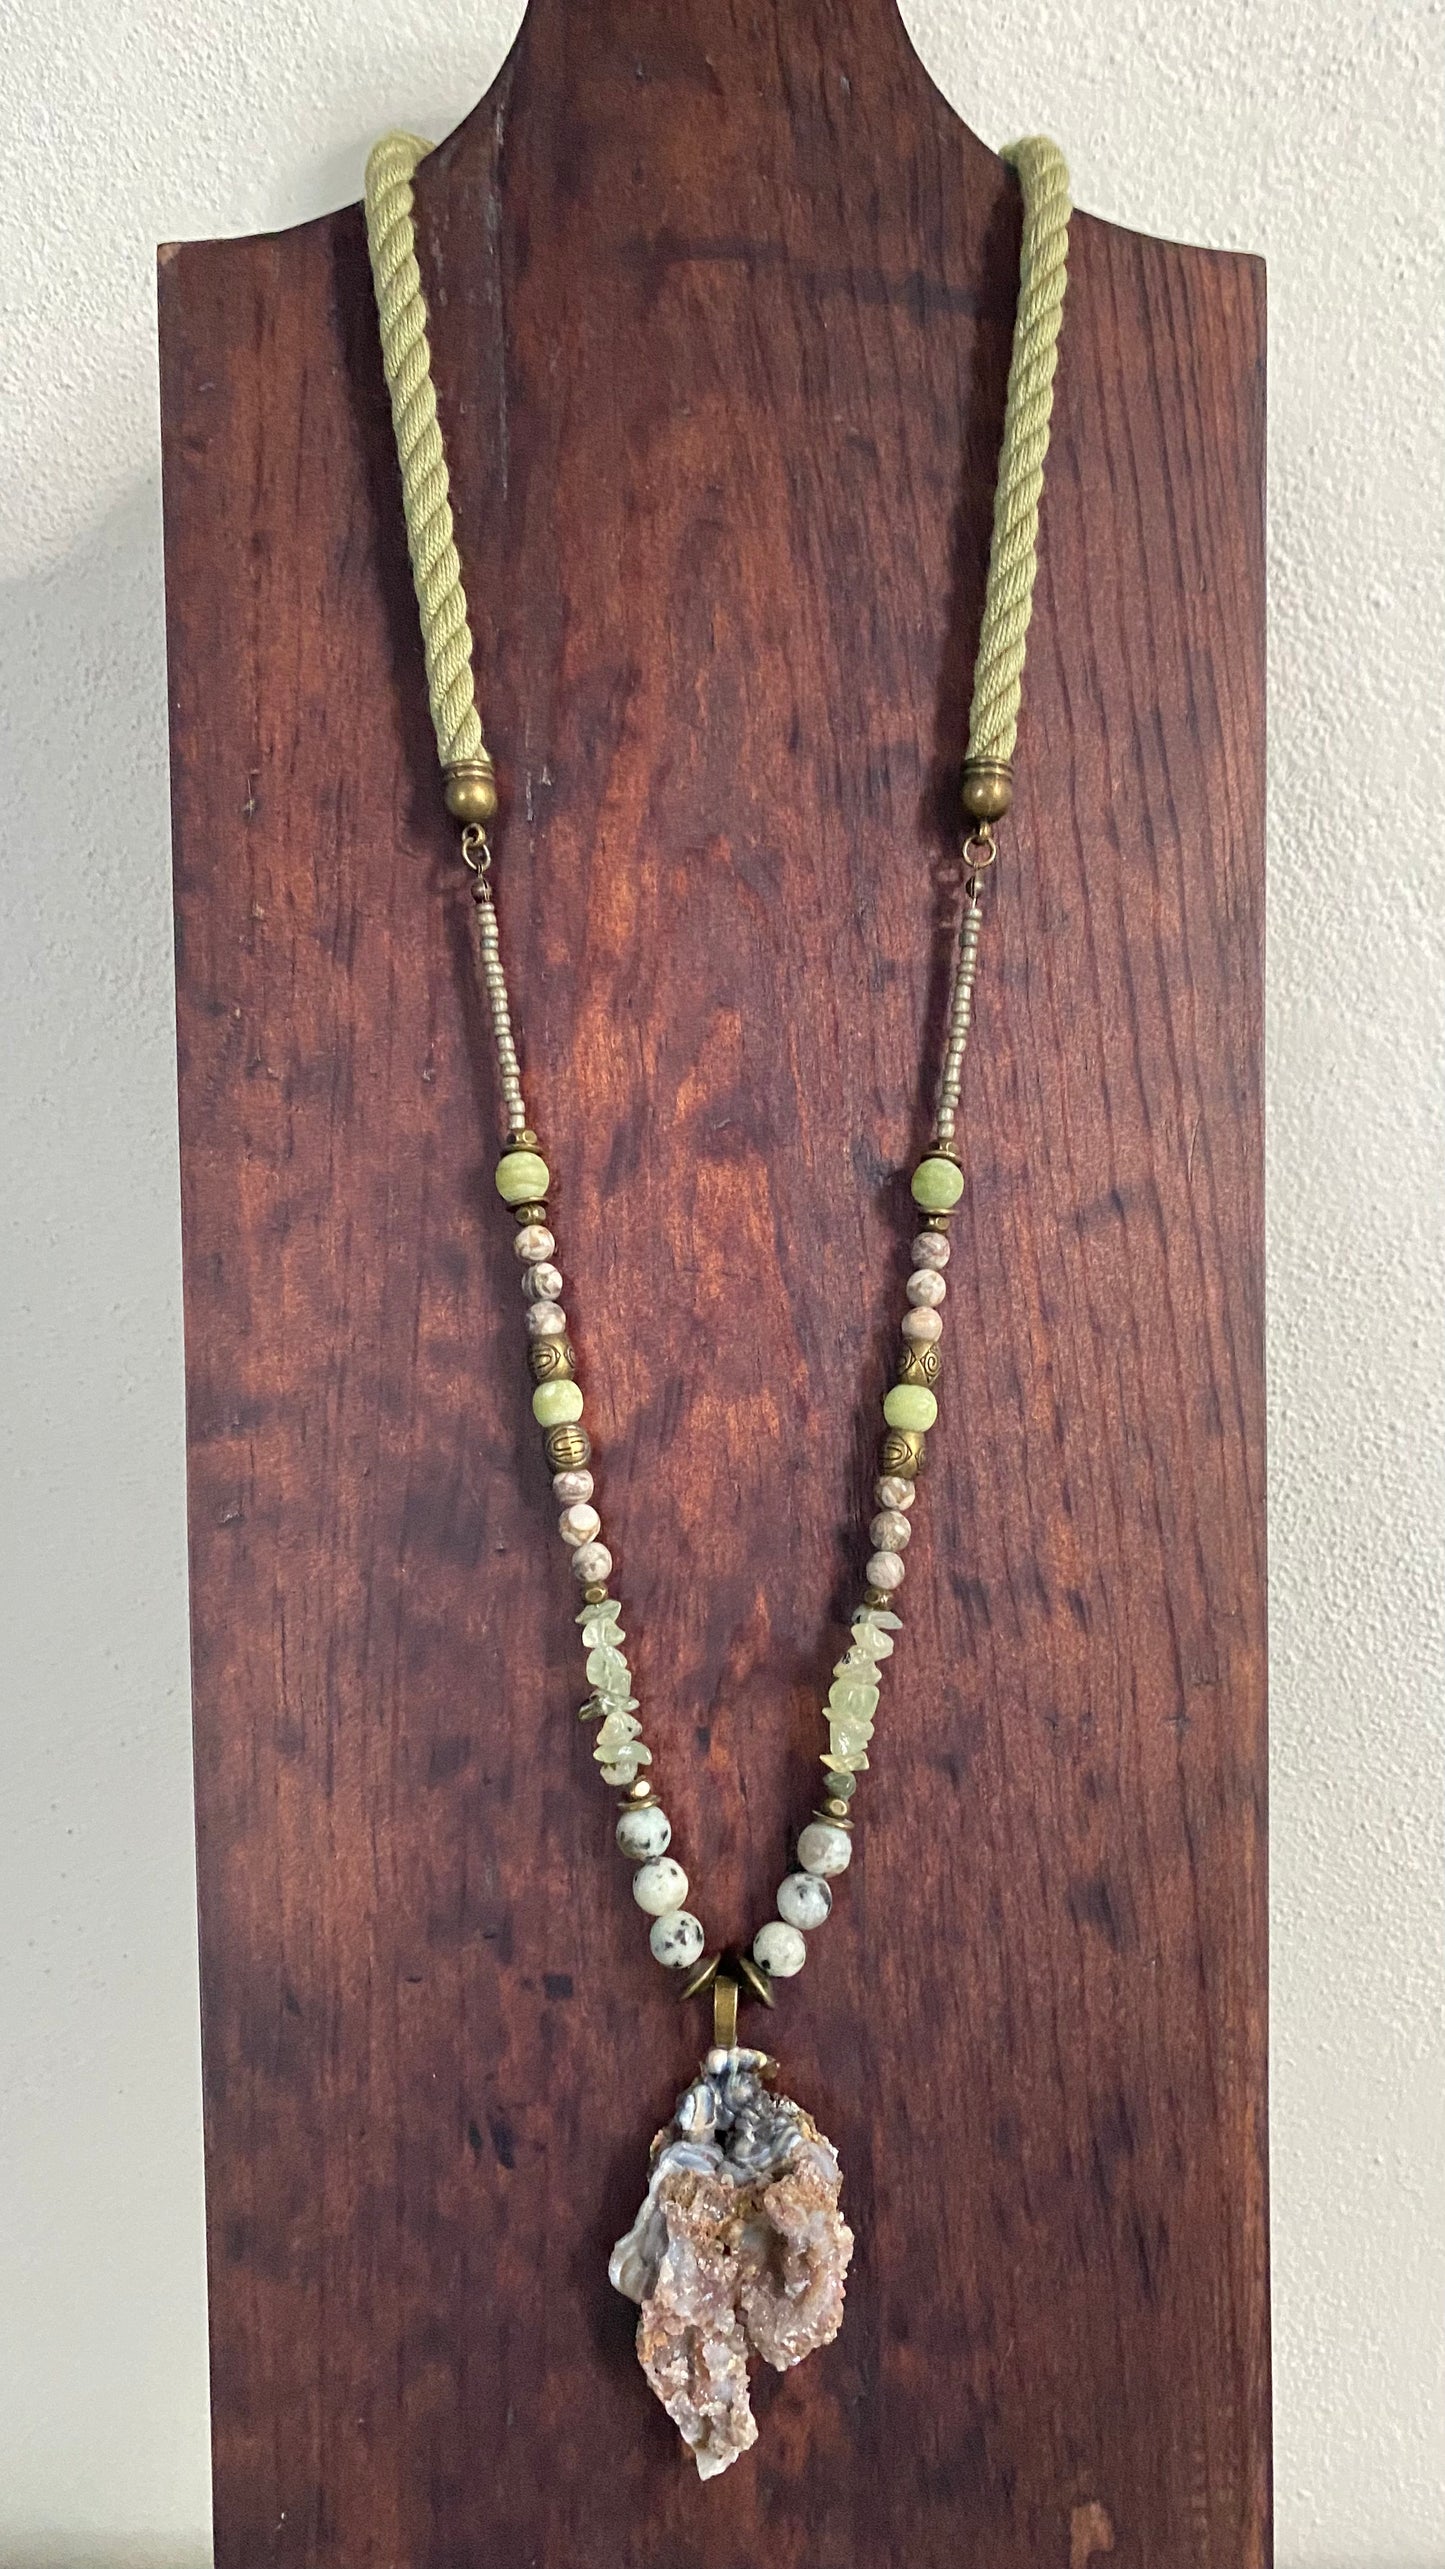 Mexican Agate Pendant Necklace